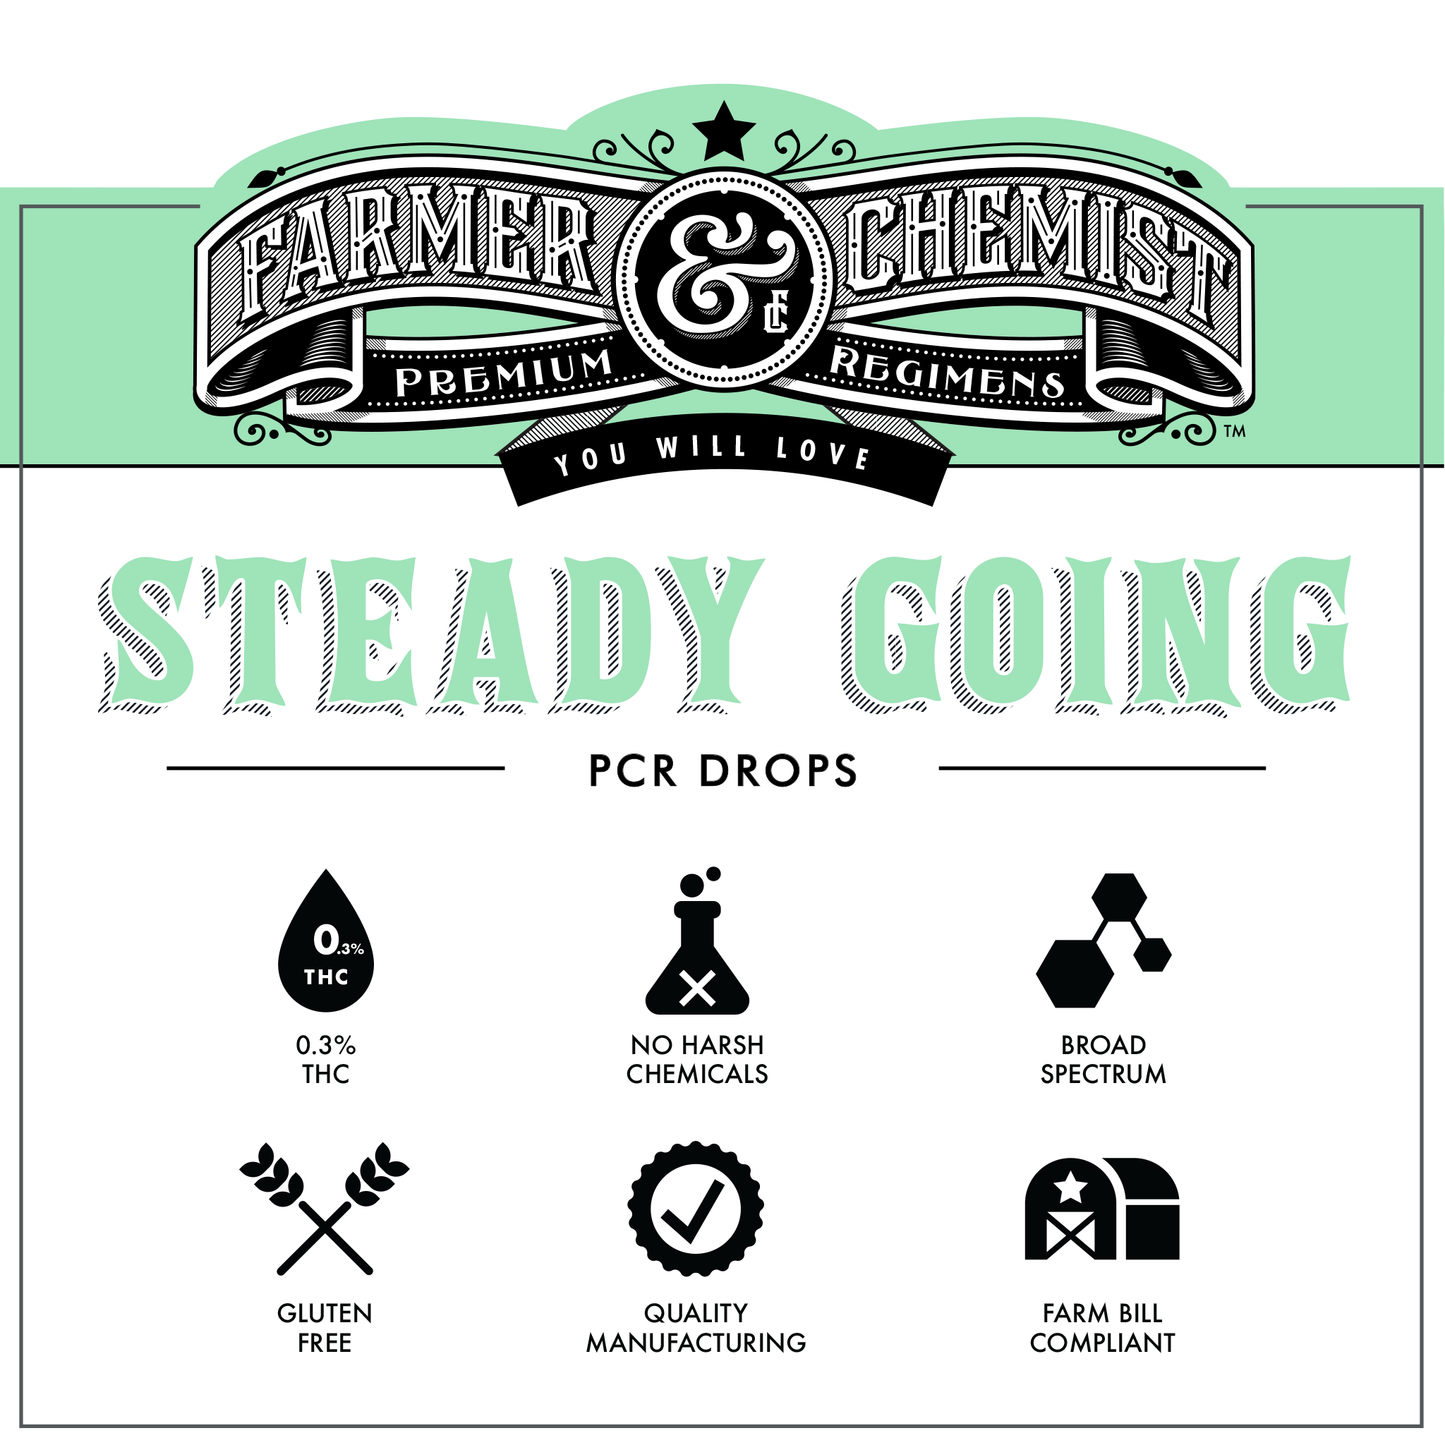 STEADY GOING - Minty Me 1500mg PCR Tincture (Case pack of 4)